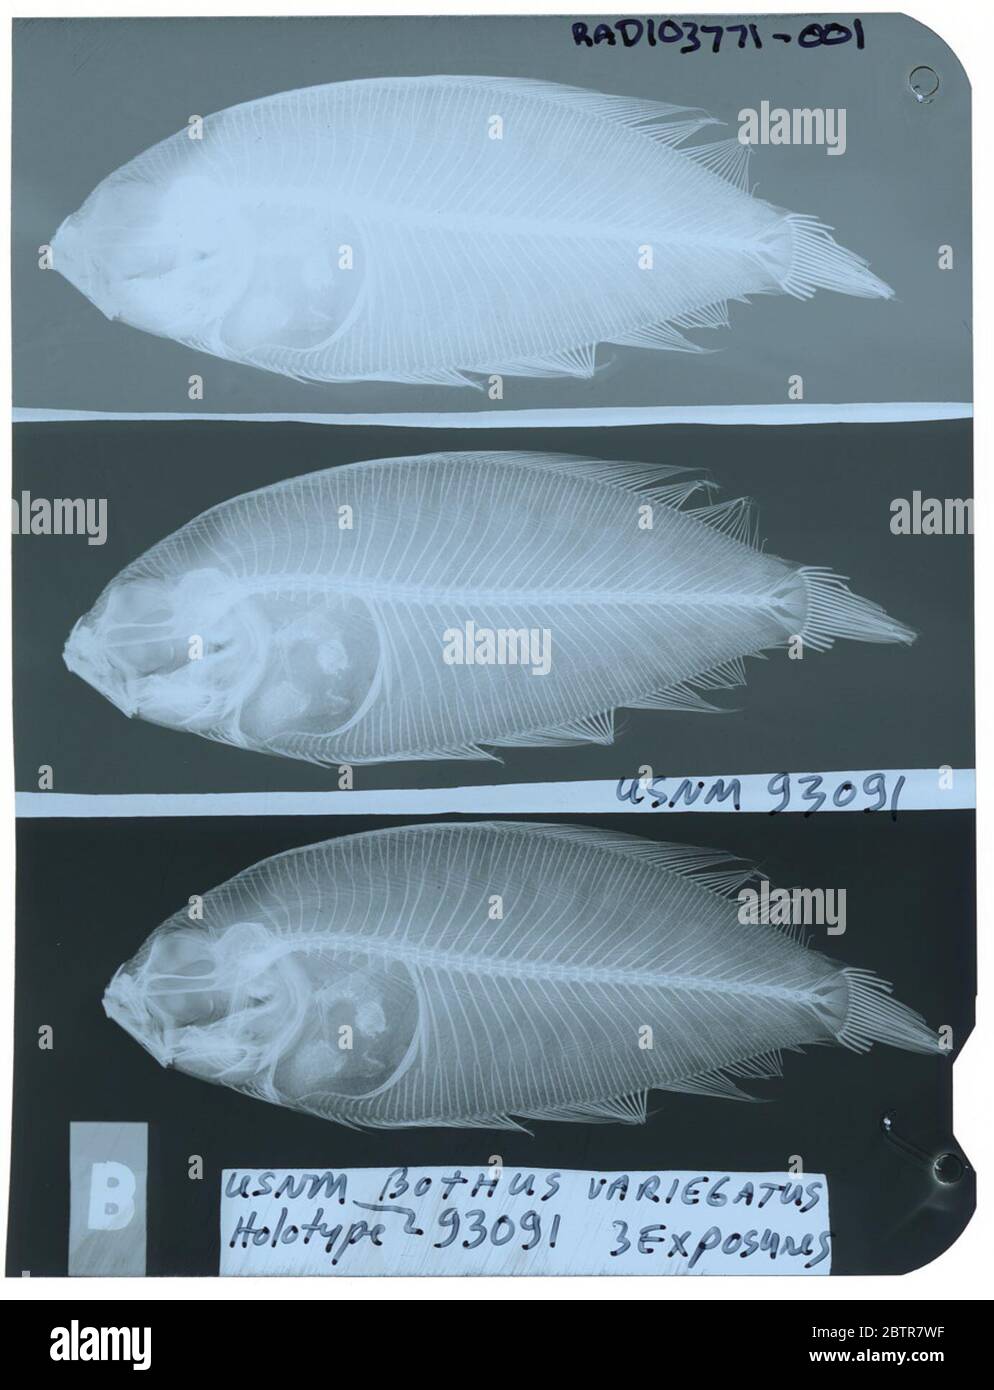 Bothus variegatus Fowler. Radiograph is of a holotype; The Smithsonian NMNH Division of Fishes uses the convention of maintaining the original species name for type specimens designated at the time of description. The currently accepted name for this species is Psettina variegata.29 Oct 2018D. 54812 Stock Photo